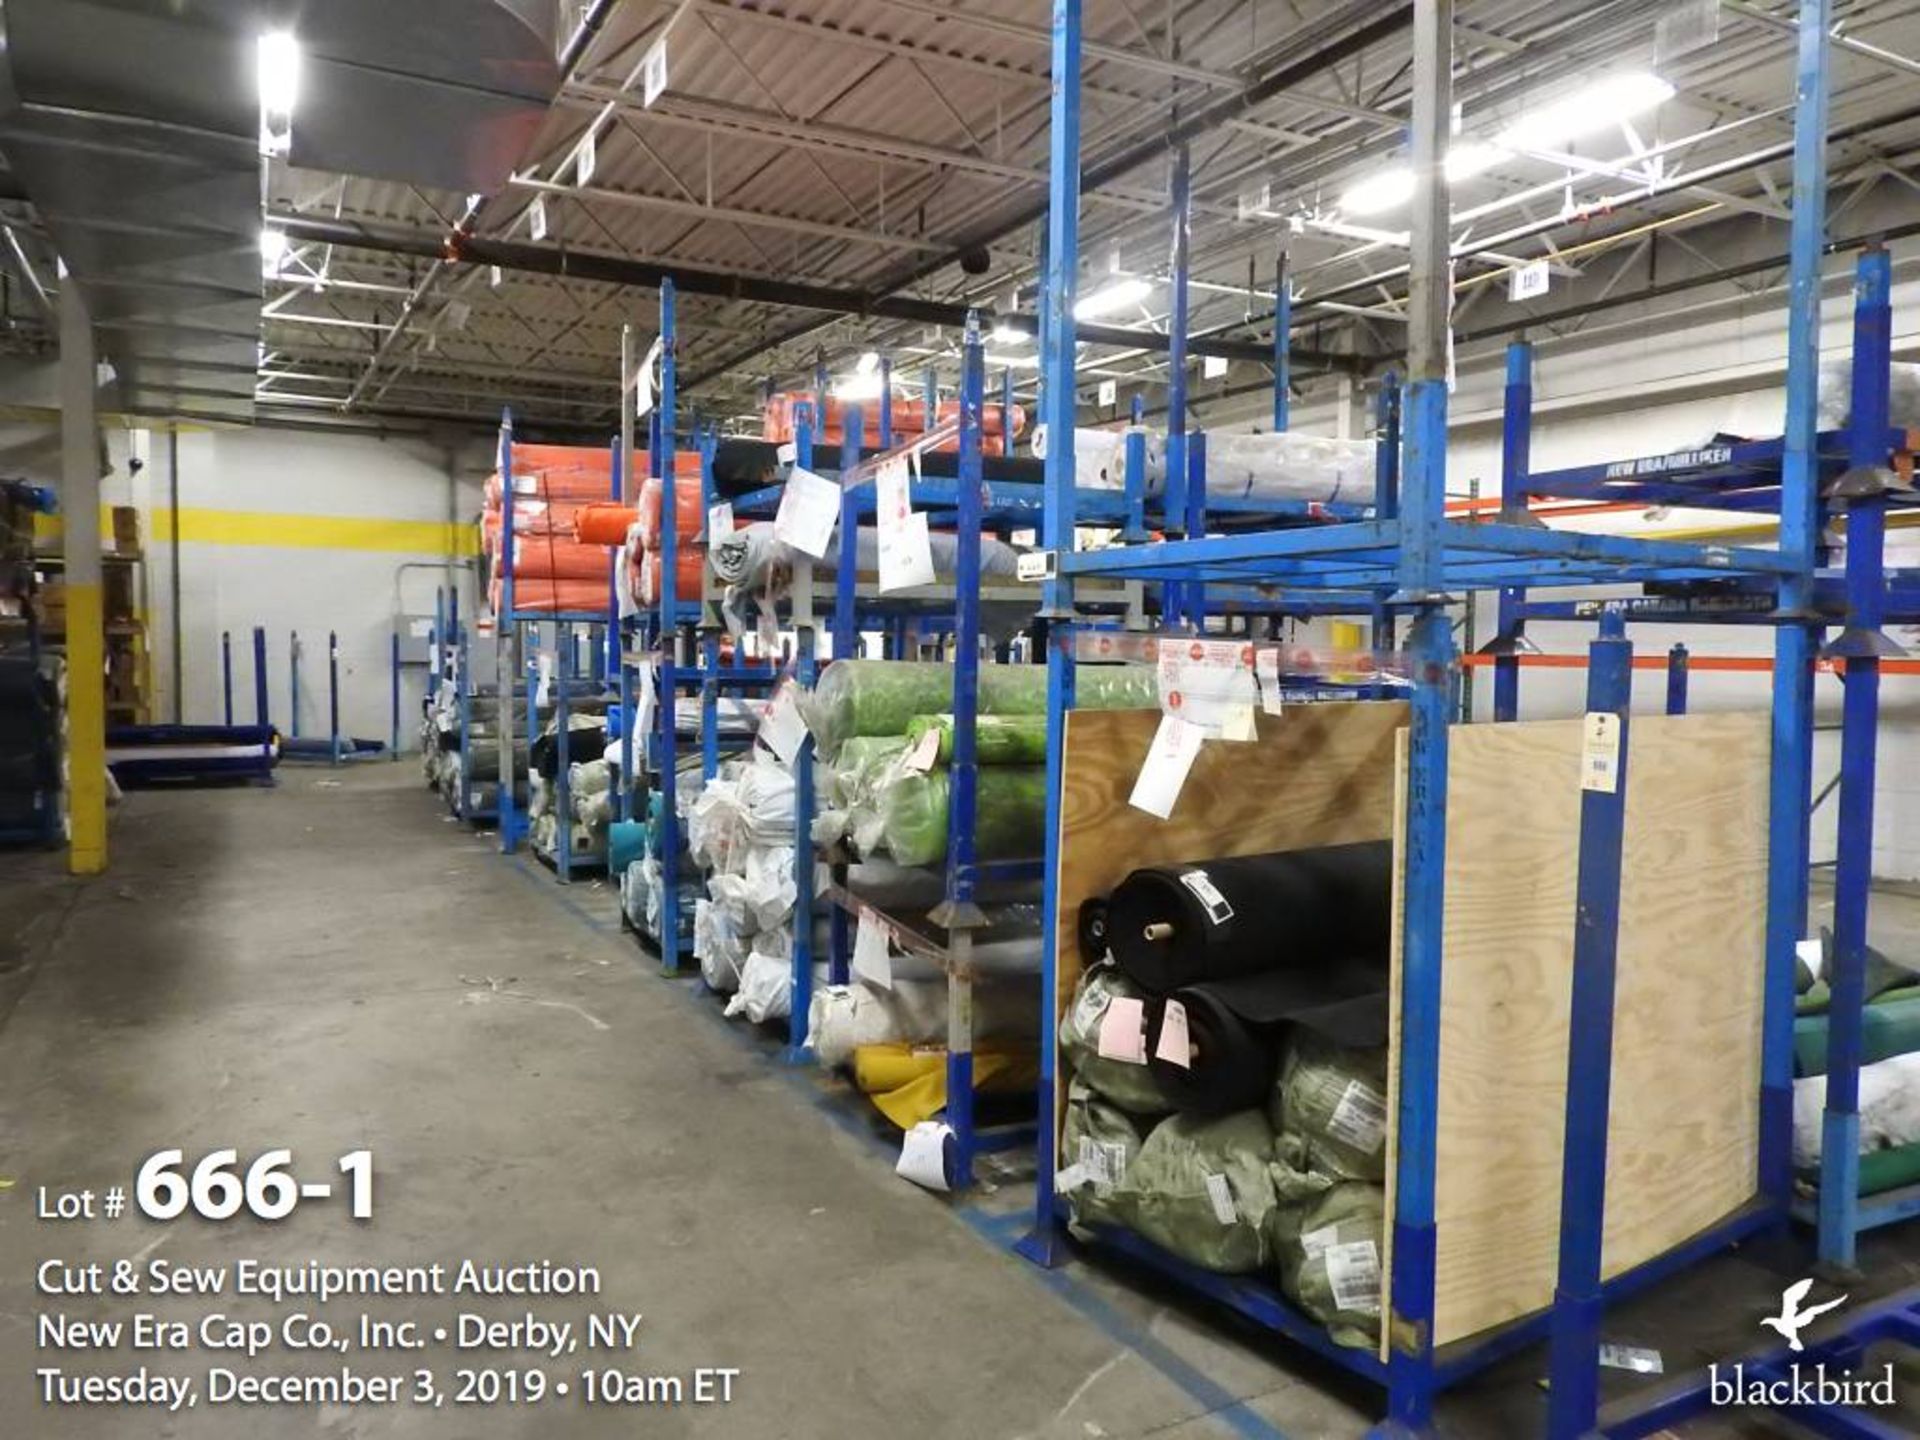 15 Sections of 5' x 45" x 63" high tier racks, bid per section - 15x the money